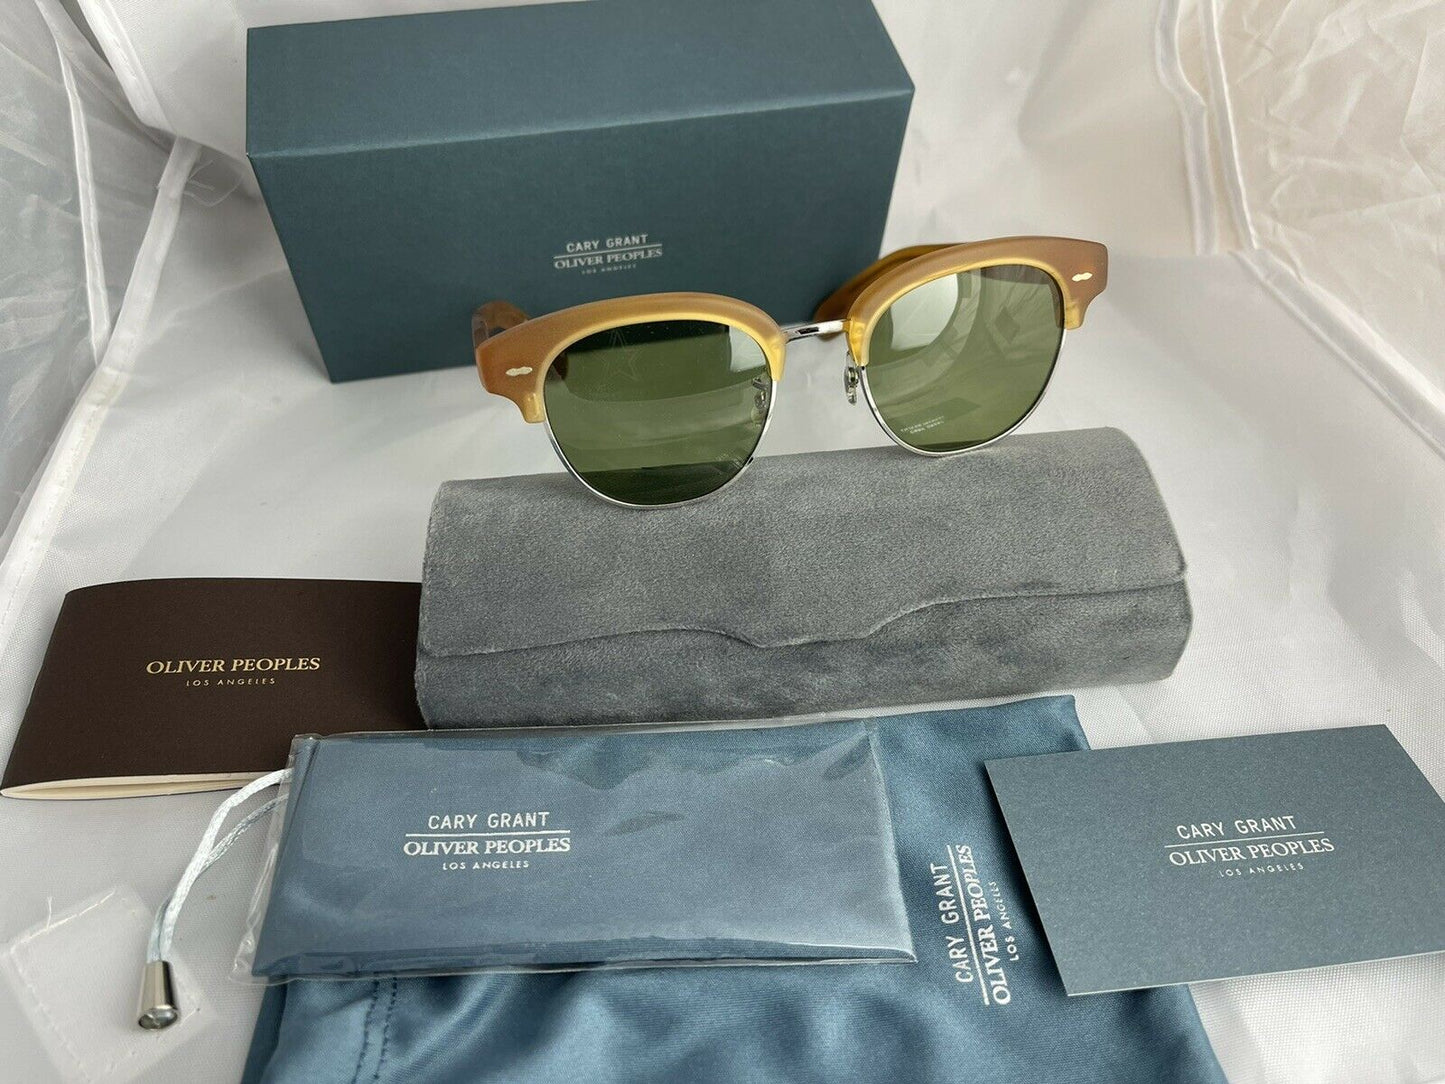 Oliver Peoples CARY GRANT 2 SUN 50mm OV 5436S Brown/Green (1699/52) Sunglasses